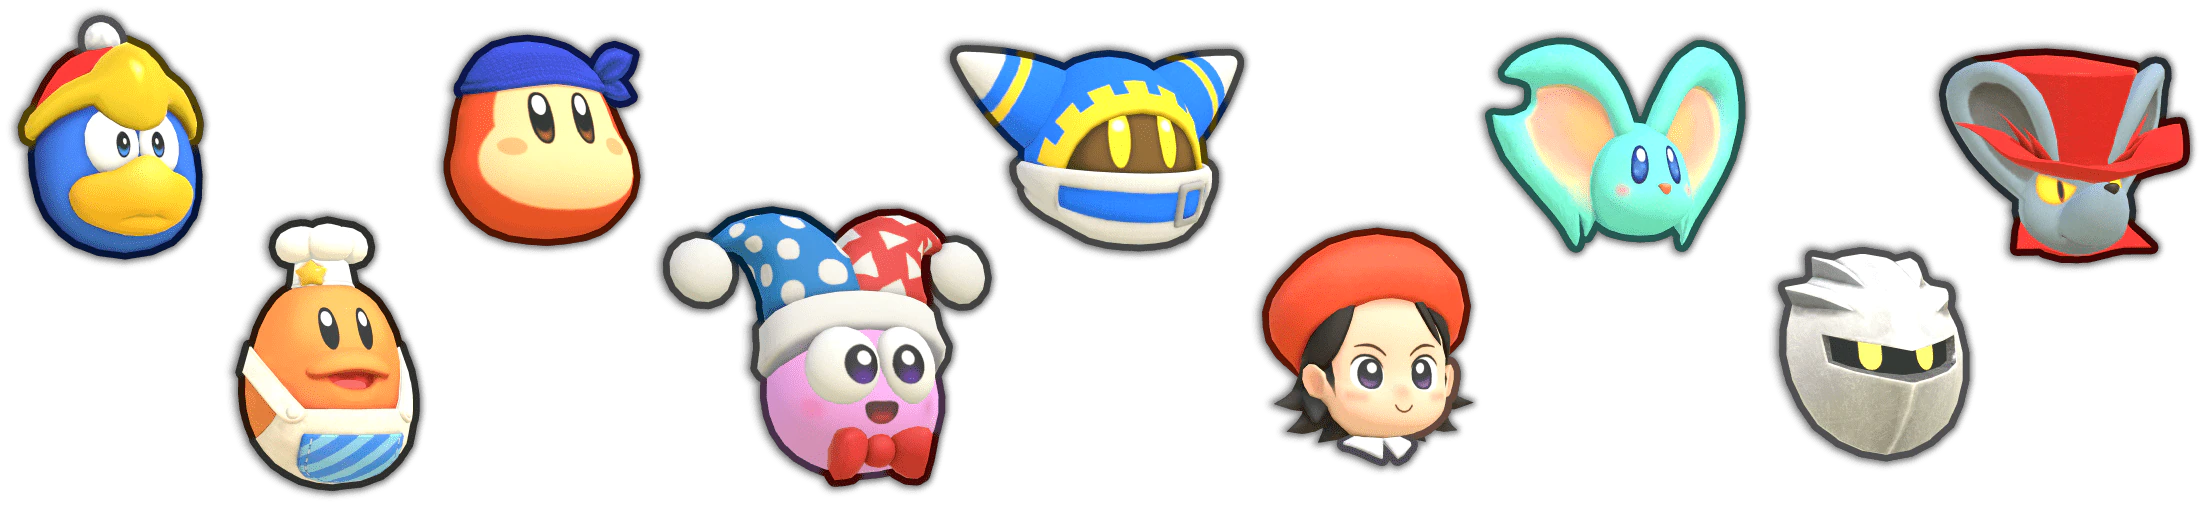 A sample of some of the Character Masks that you can collect in the game. The top row features masks based on King Dedede, Bandana Waddle Dee, Magolor, Efilin, and Daroach. The bottom row features masked based on Chef Kawasaki, Marx, Adeleine, and Meta Knight